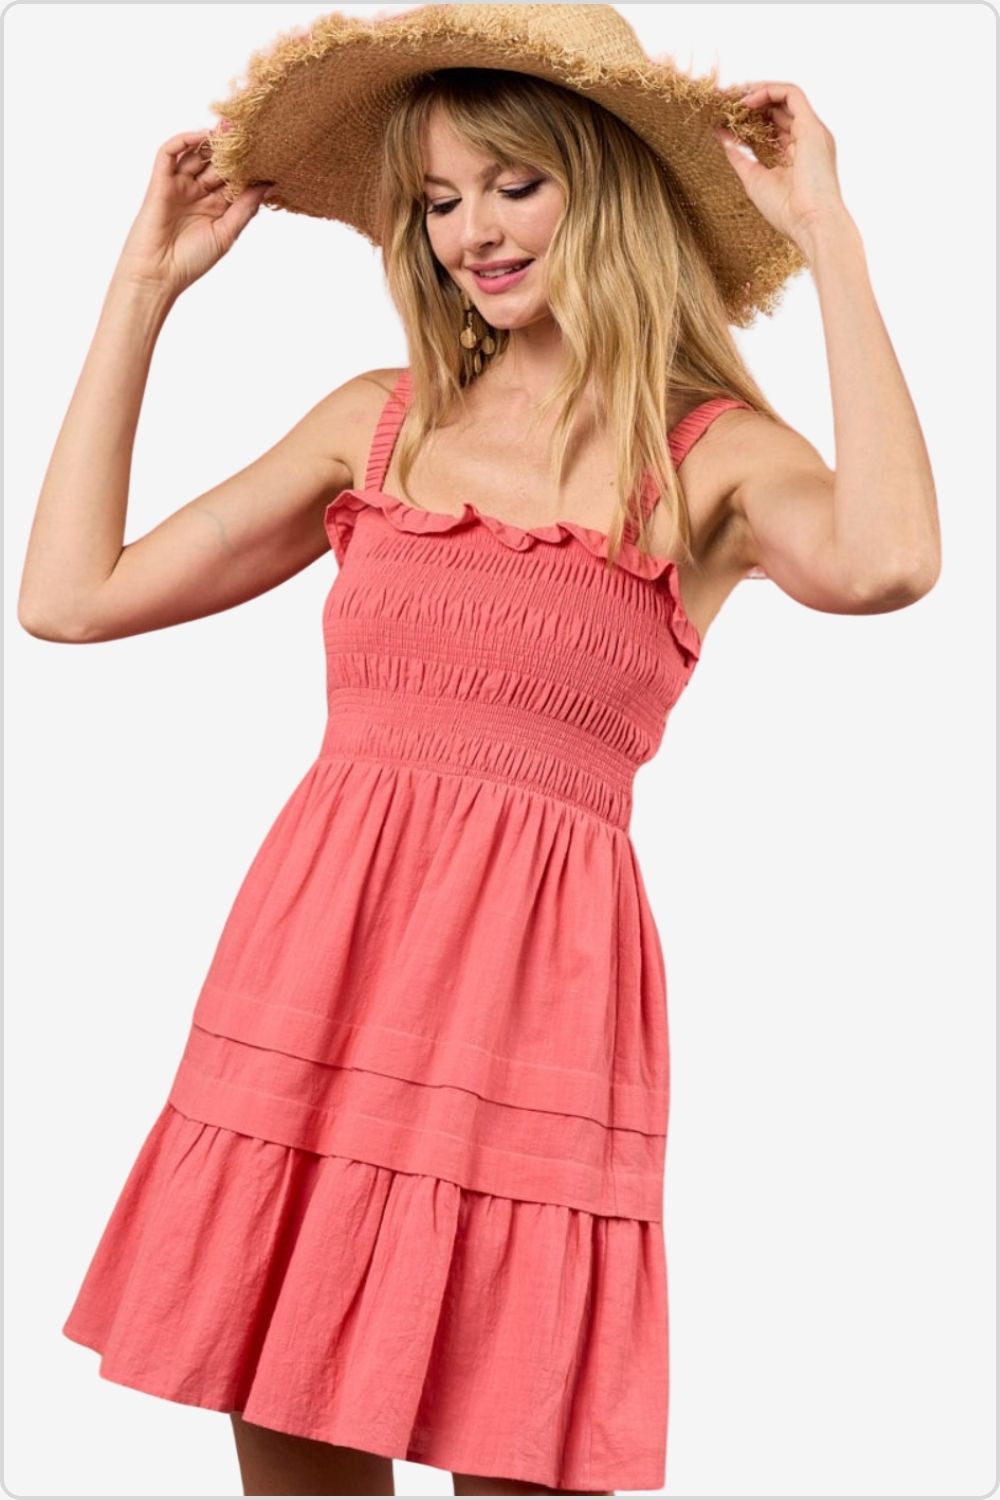 Cheerful woman in a coral smocked mini dress with ruffle hem and straw hat.